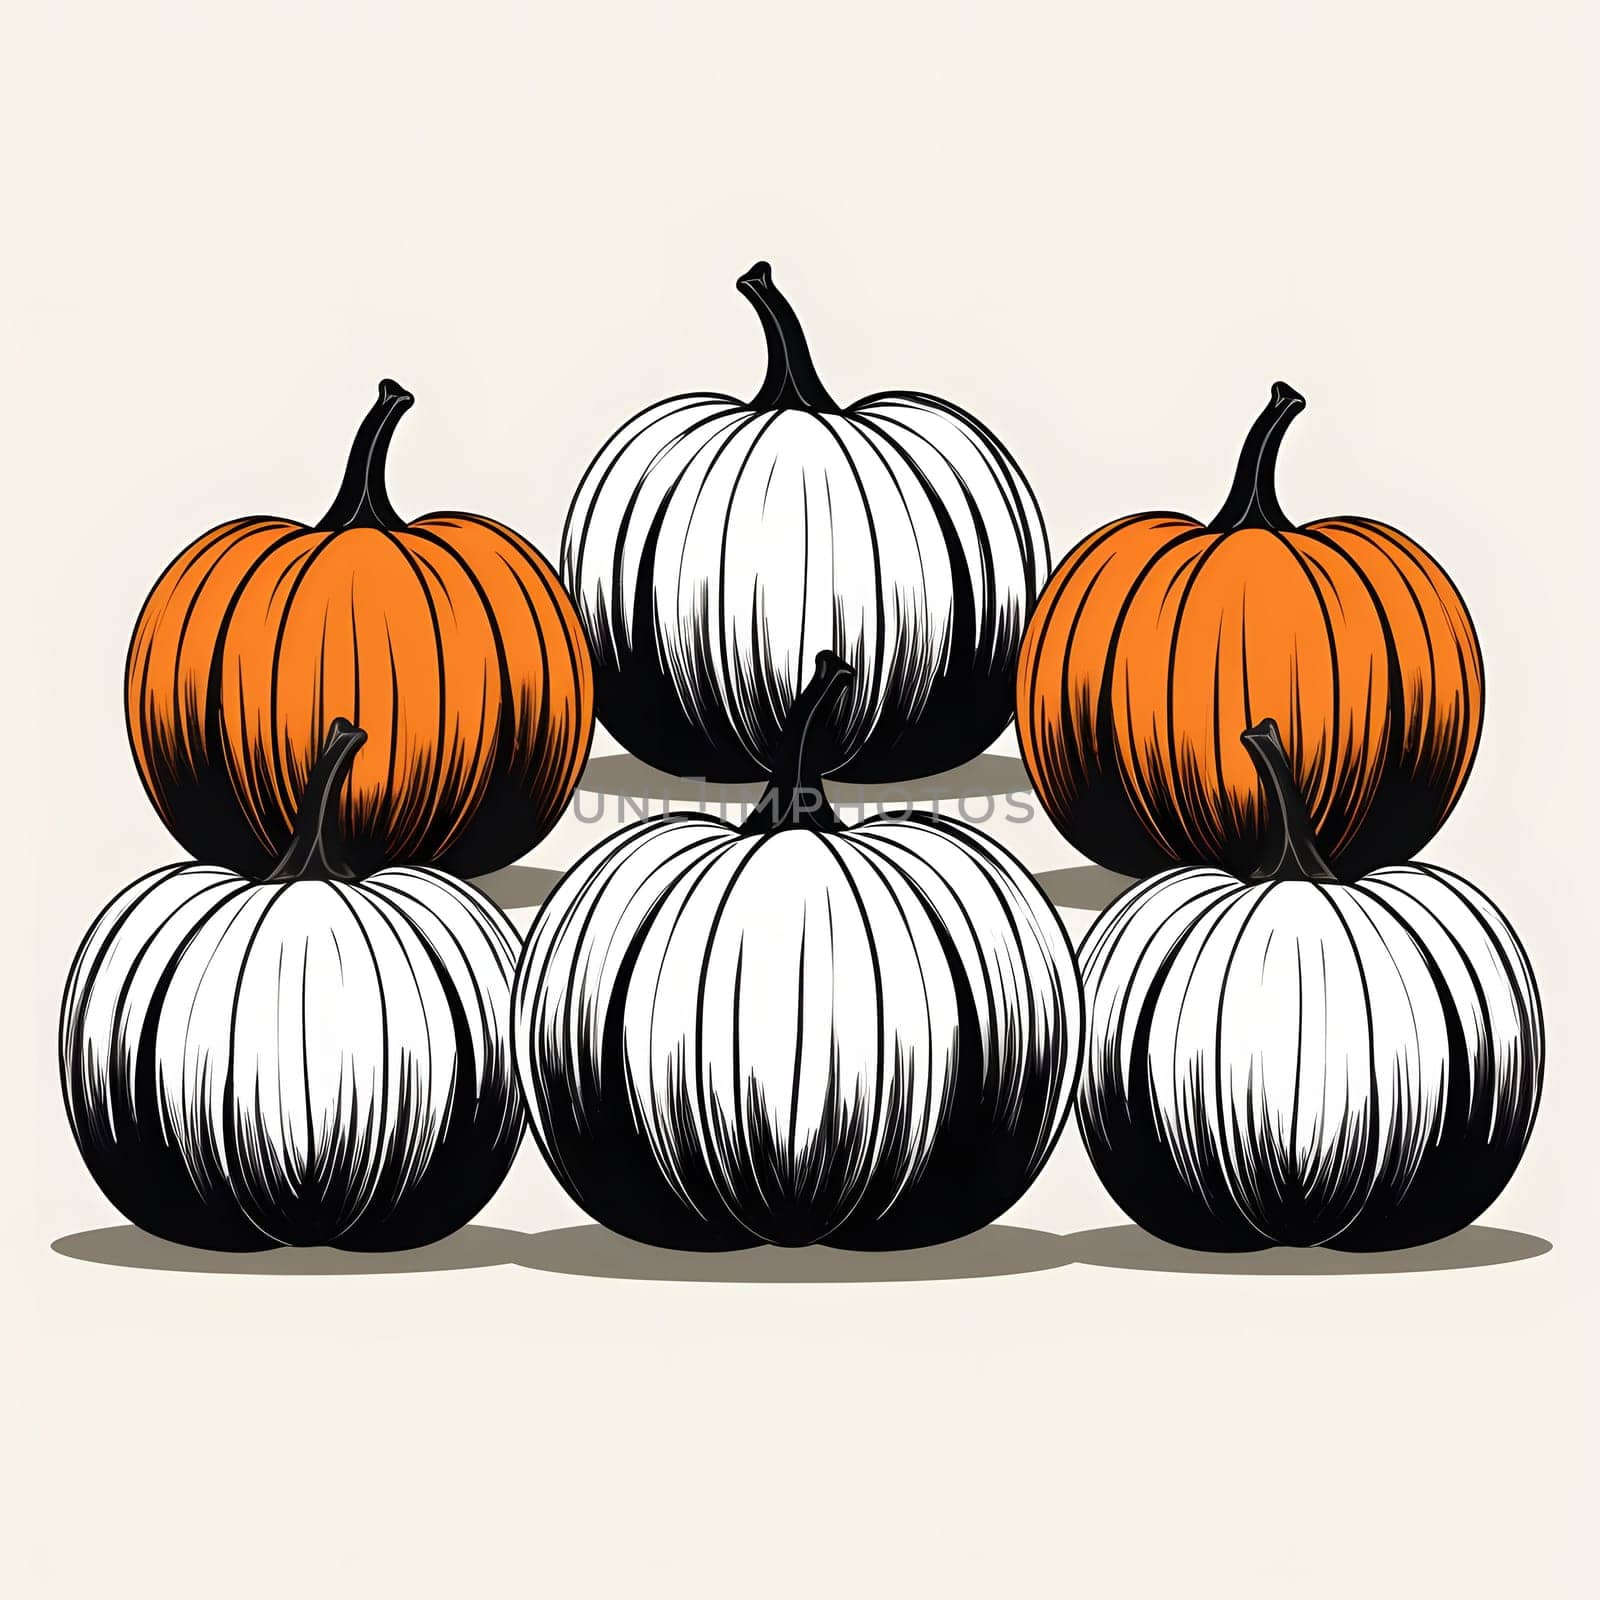 Black and white and colorful pumpkins. Pumpkin as a dish of thanksgiving for the harvest, picture on a white isolated background. Atmosphere of joy and celebration.